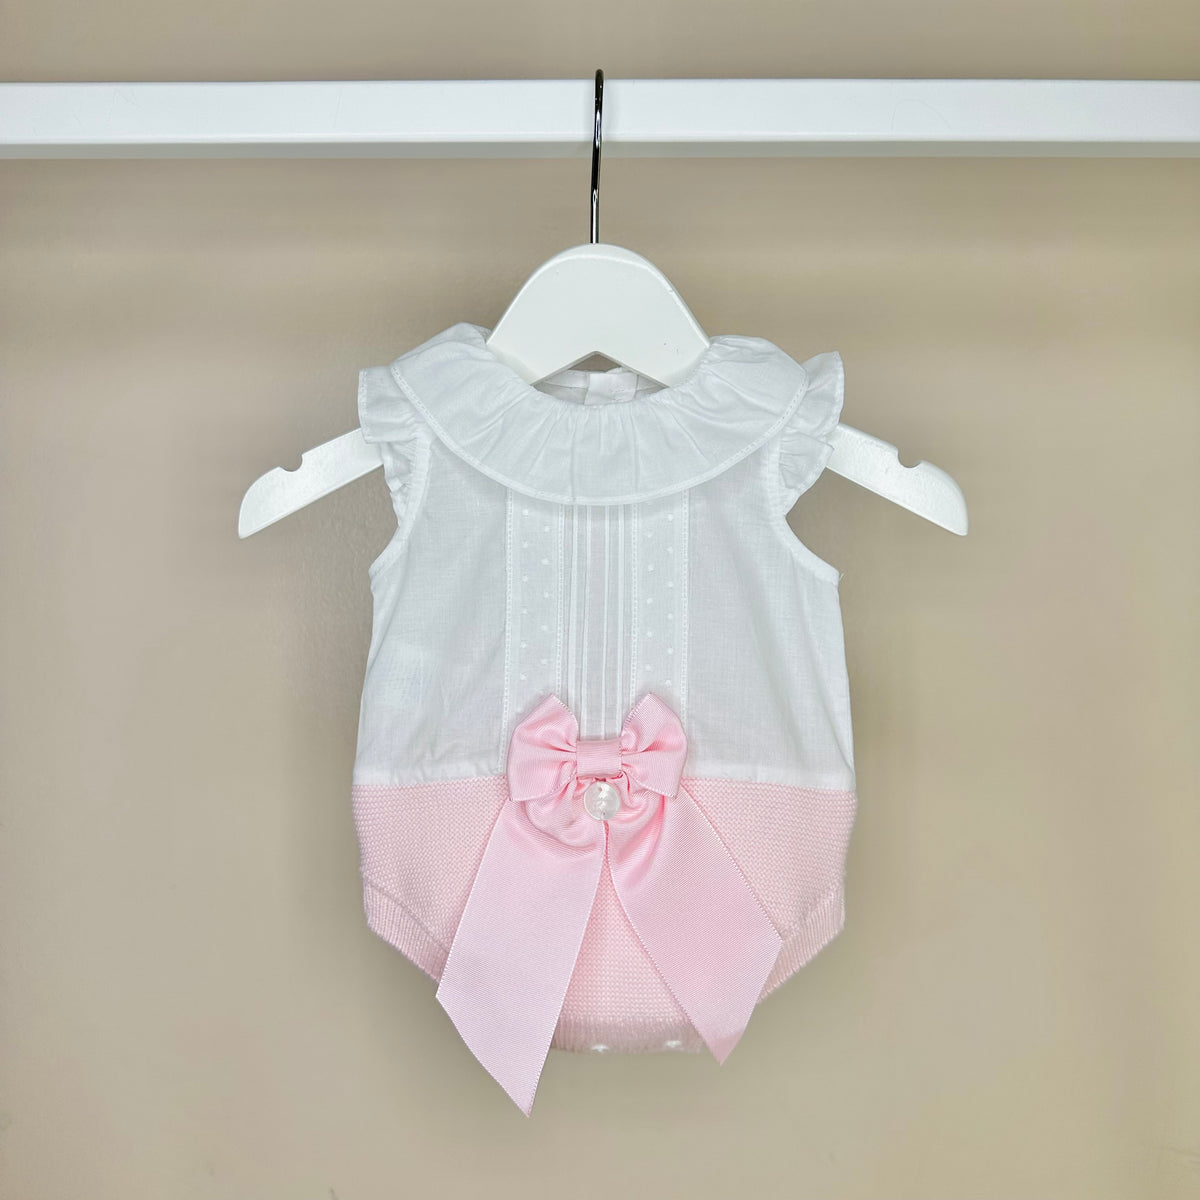 White & Pink Half Knitted Baby Girl Romper